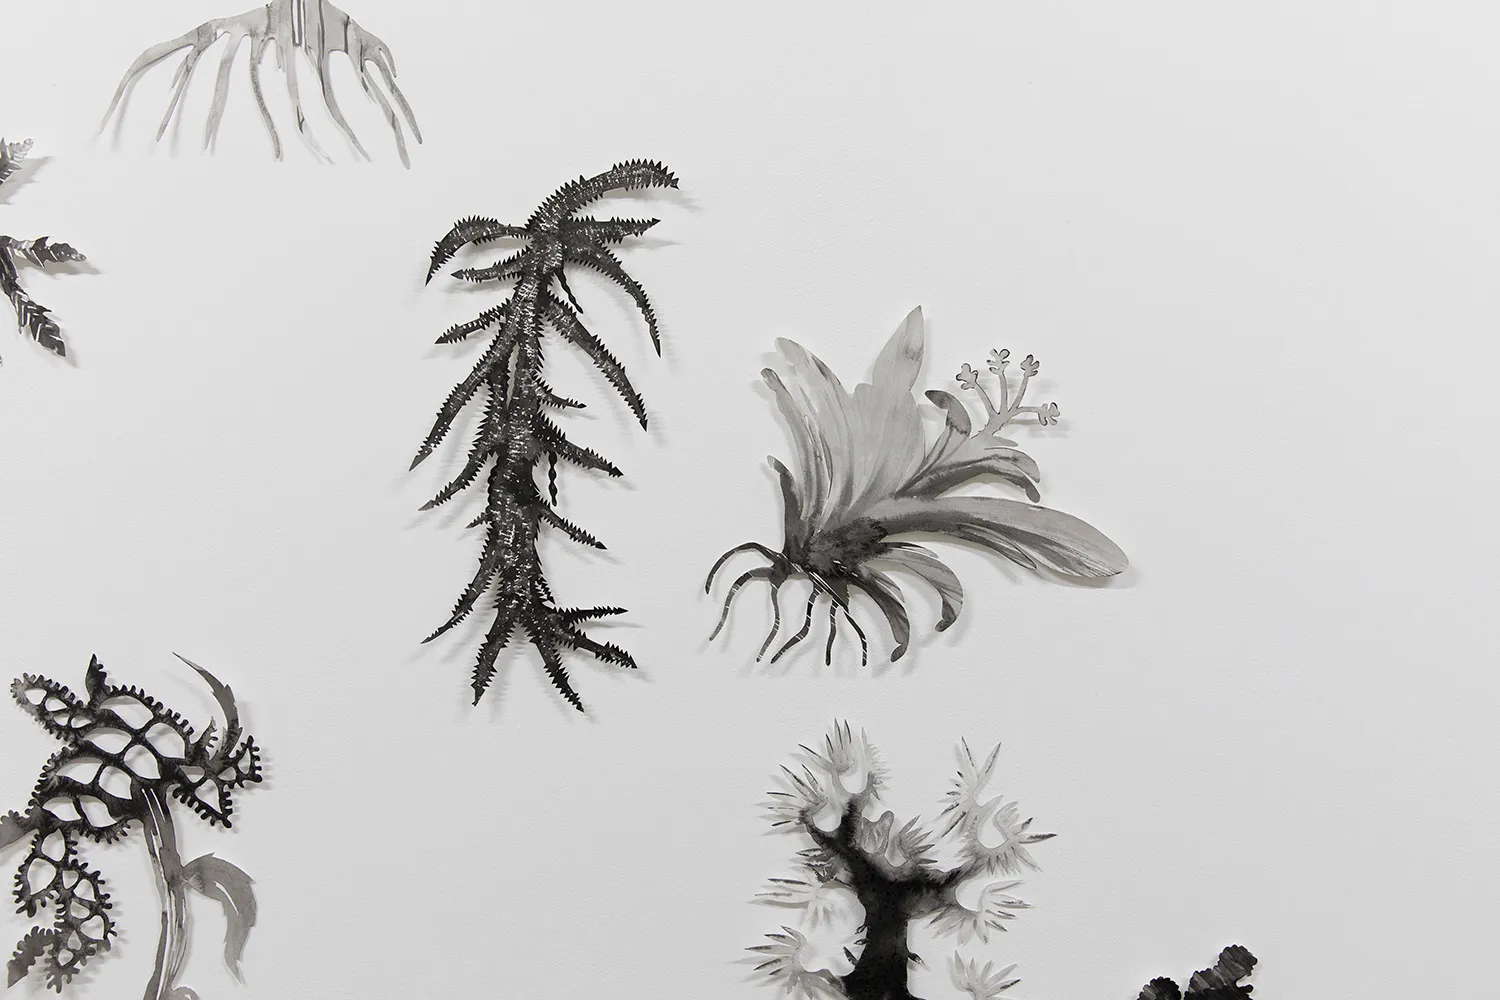 cut outs of intricate black and white plant-like shapes